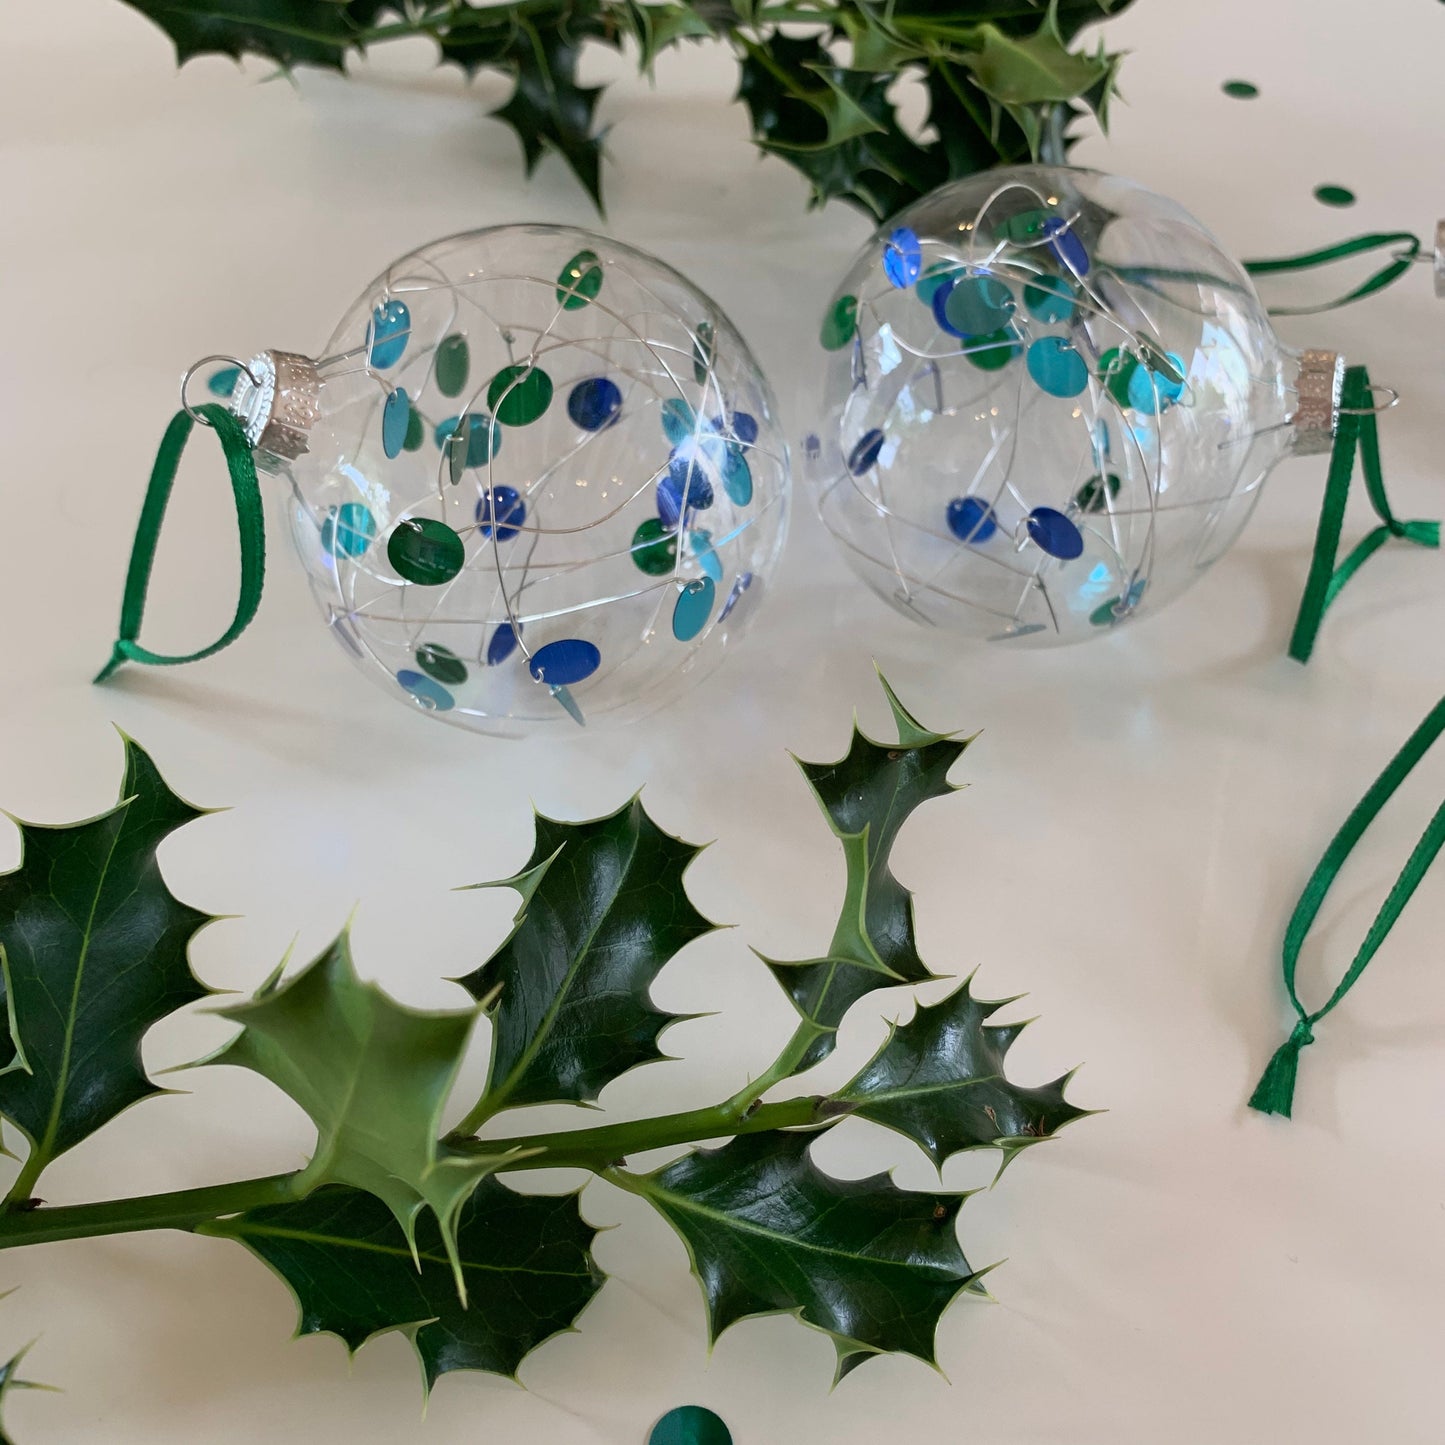 6 Sequin Mermaid Baubles - Glass Ornament - Christmas Tree Decoration - Clear Glass Xmas - Hand tied Sequins - Blue Baubles - Green - 7cm